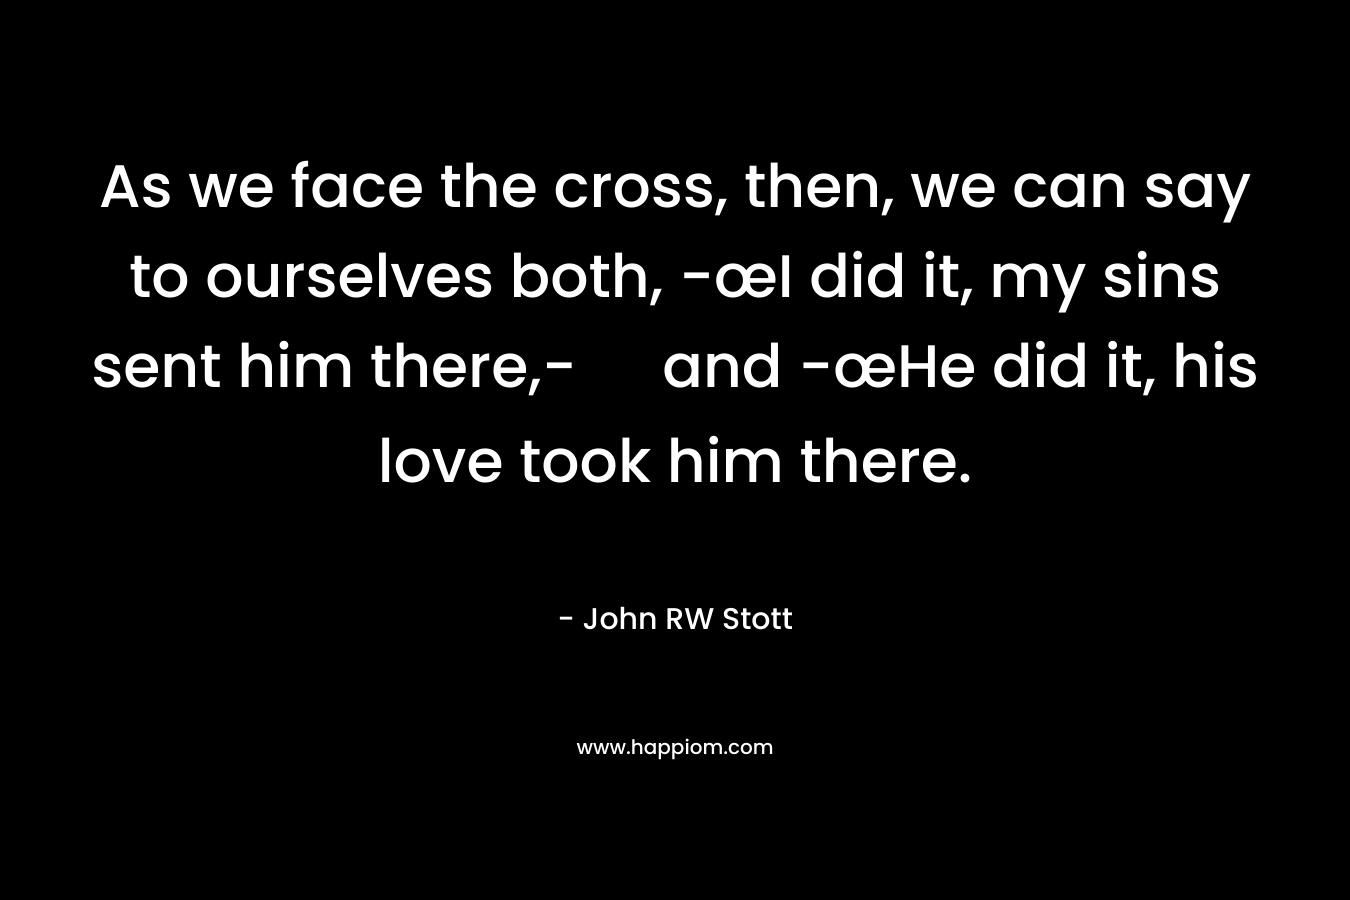 As we face the cross, then, we can say to ourselves both, -œI did it, my sins sent him there,- and -œHe did it, his love took him there. – John RW Stott